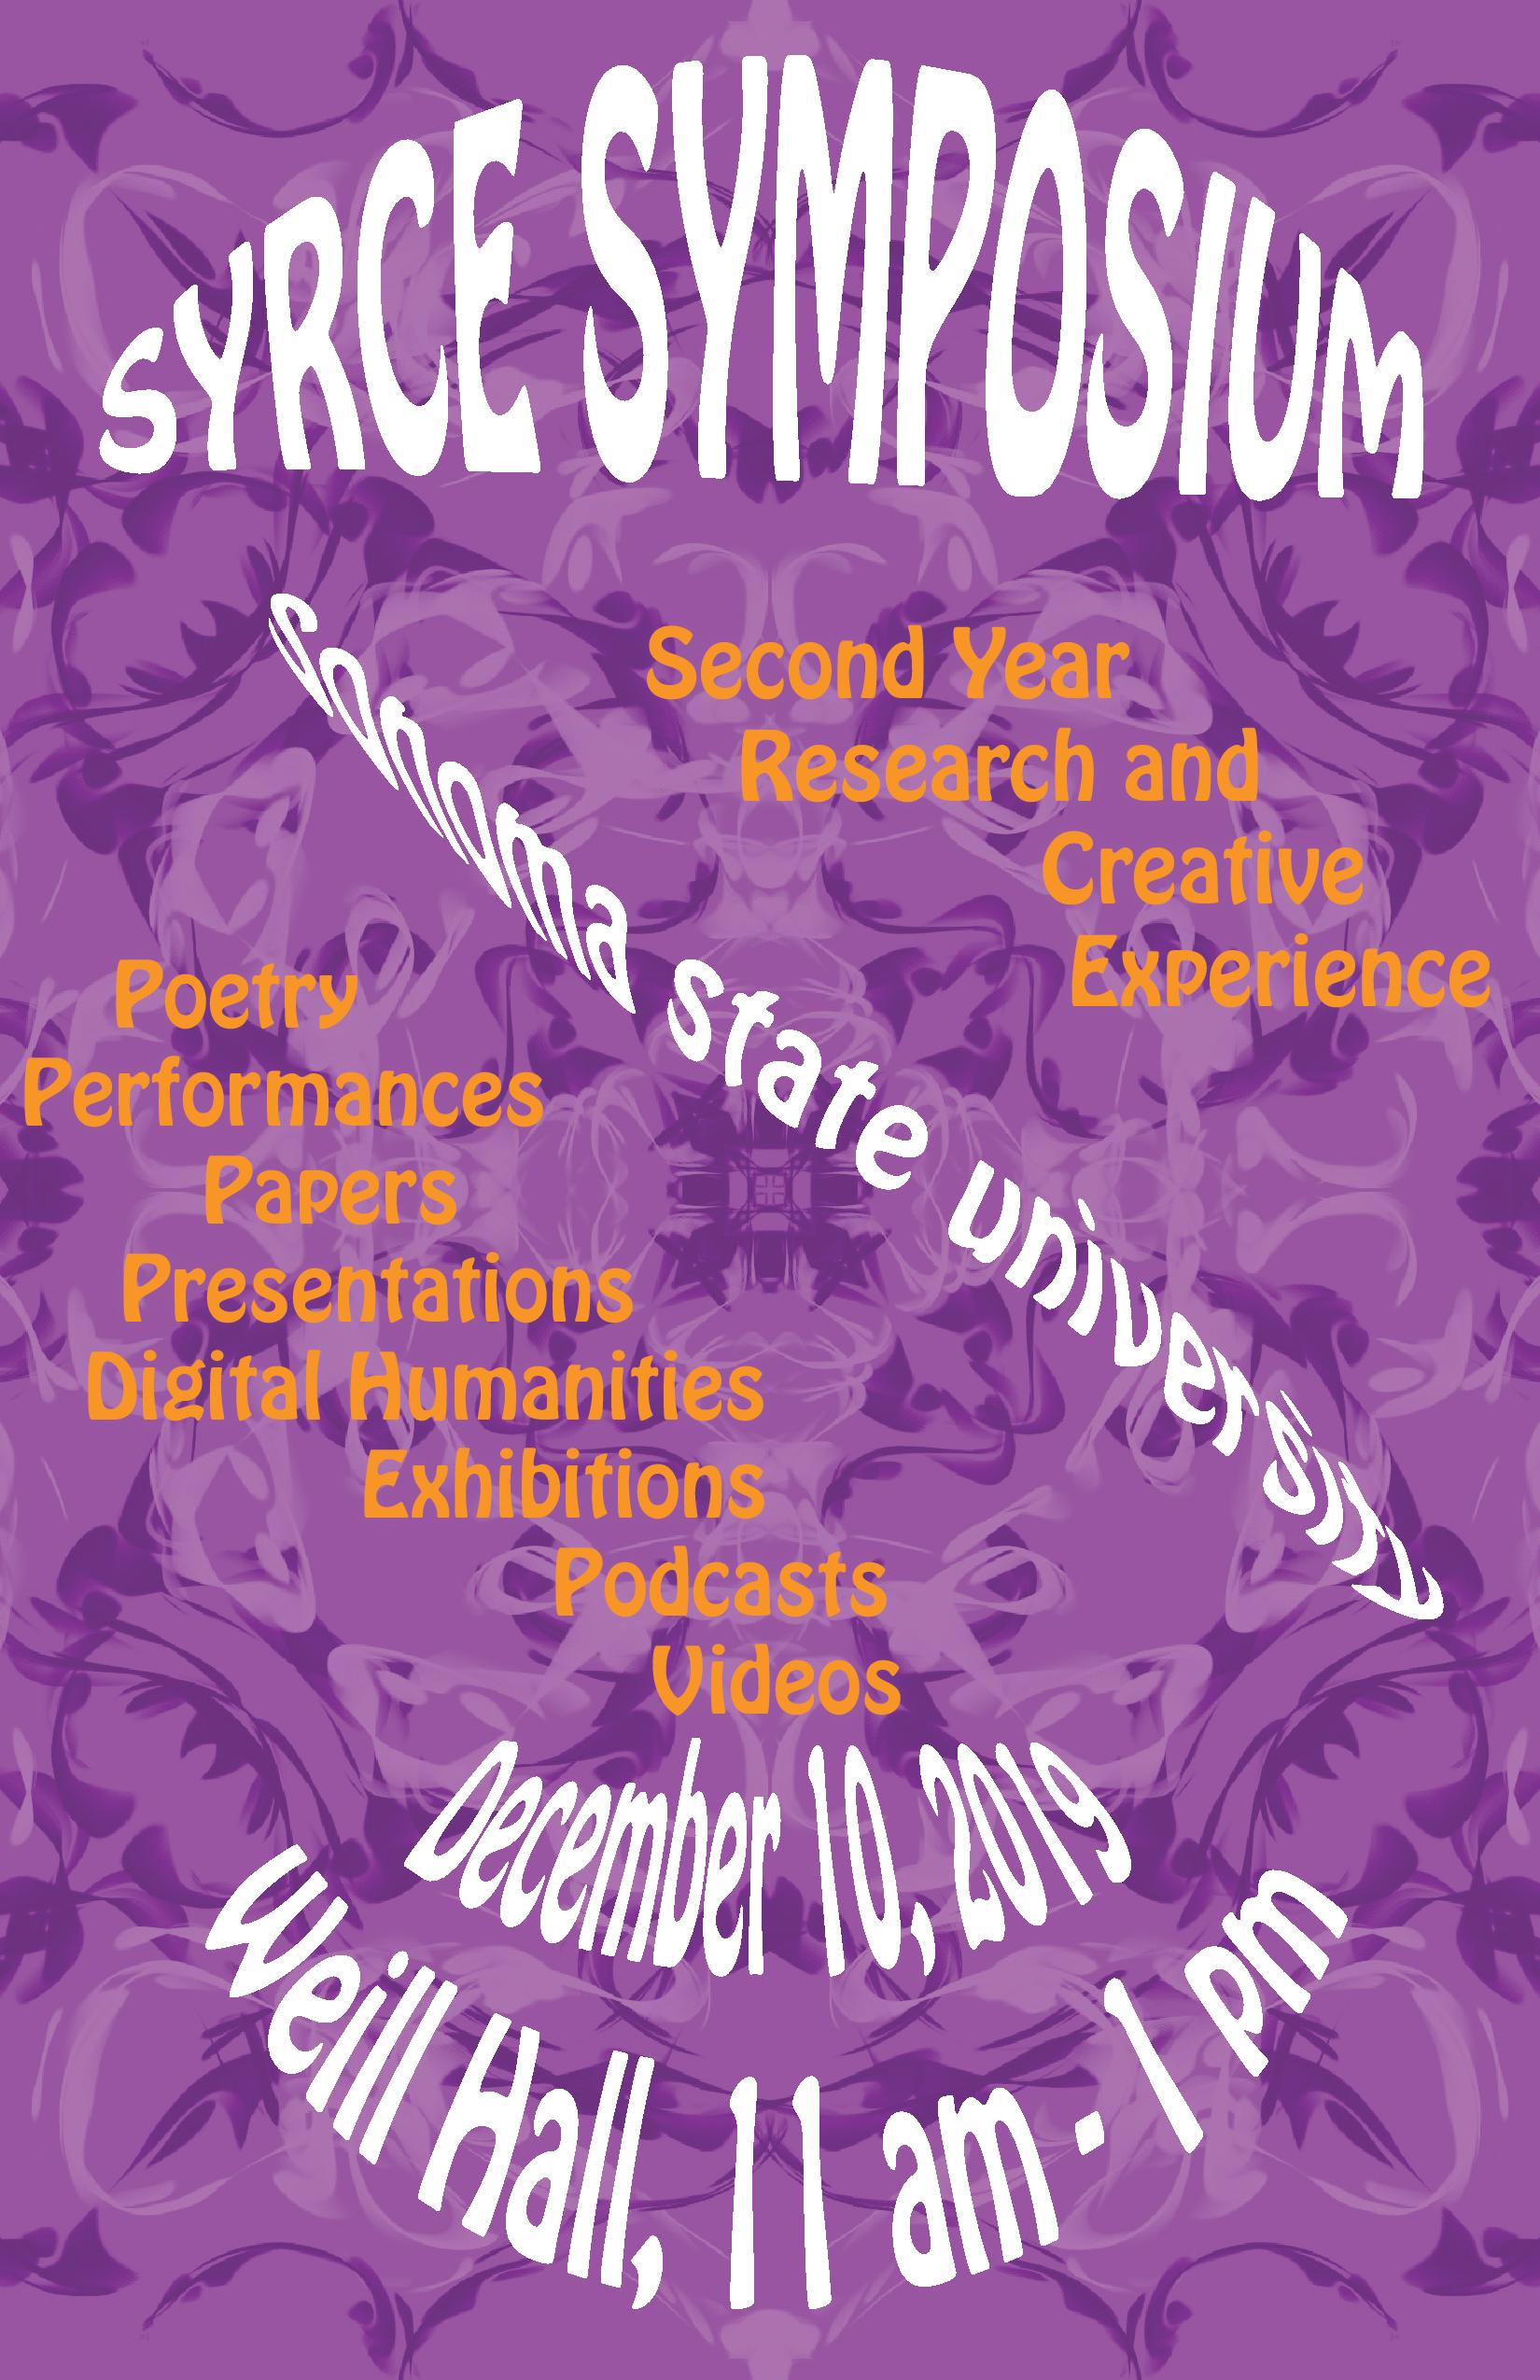 Purple background SYRCE poster